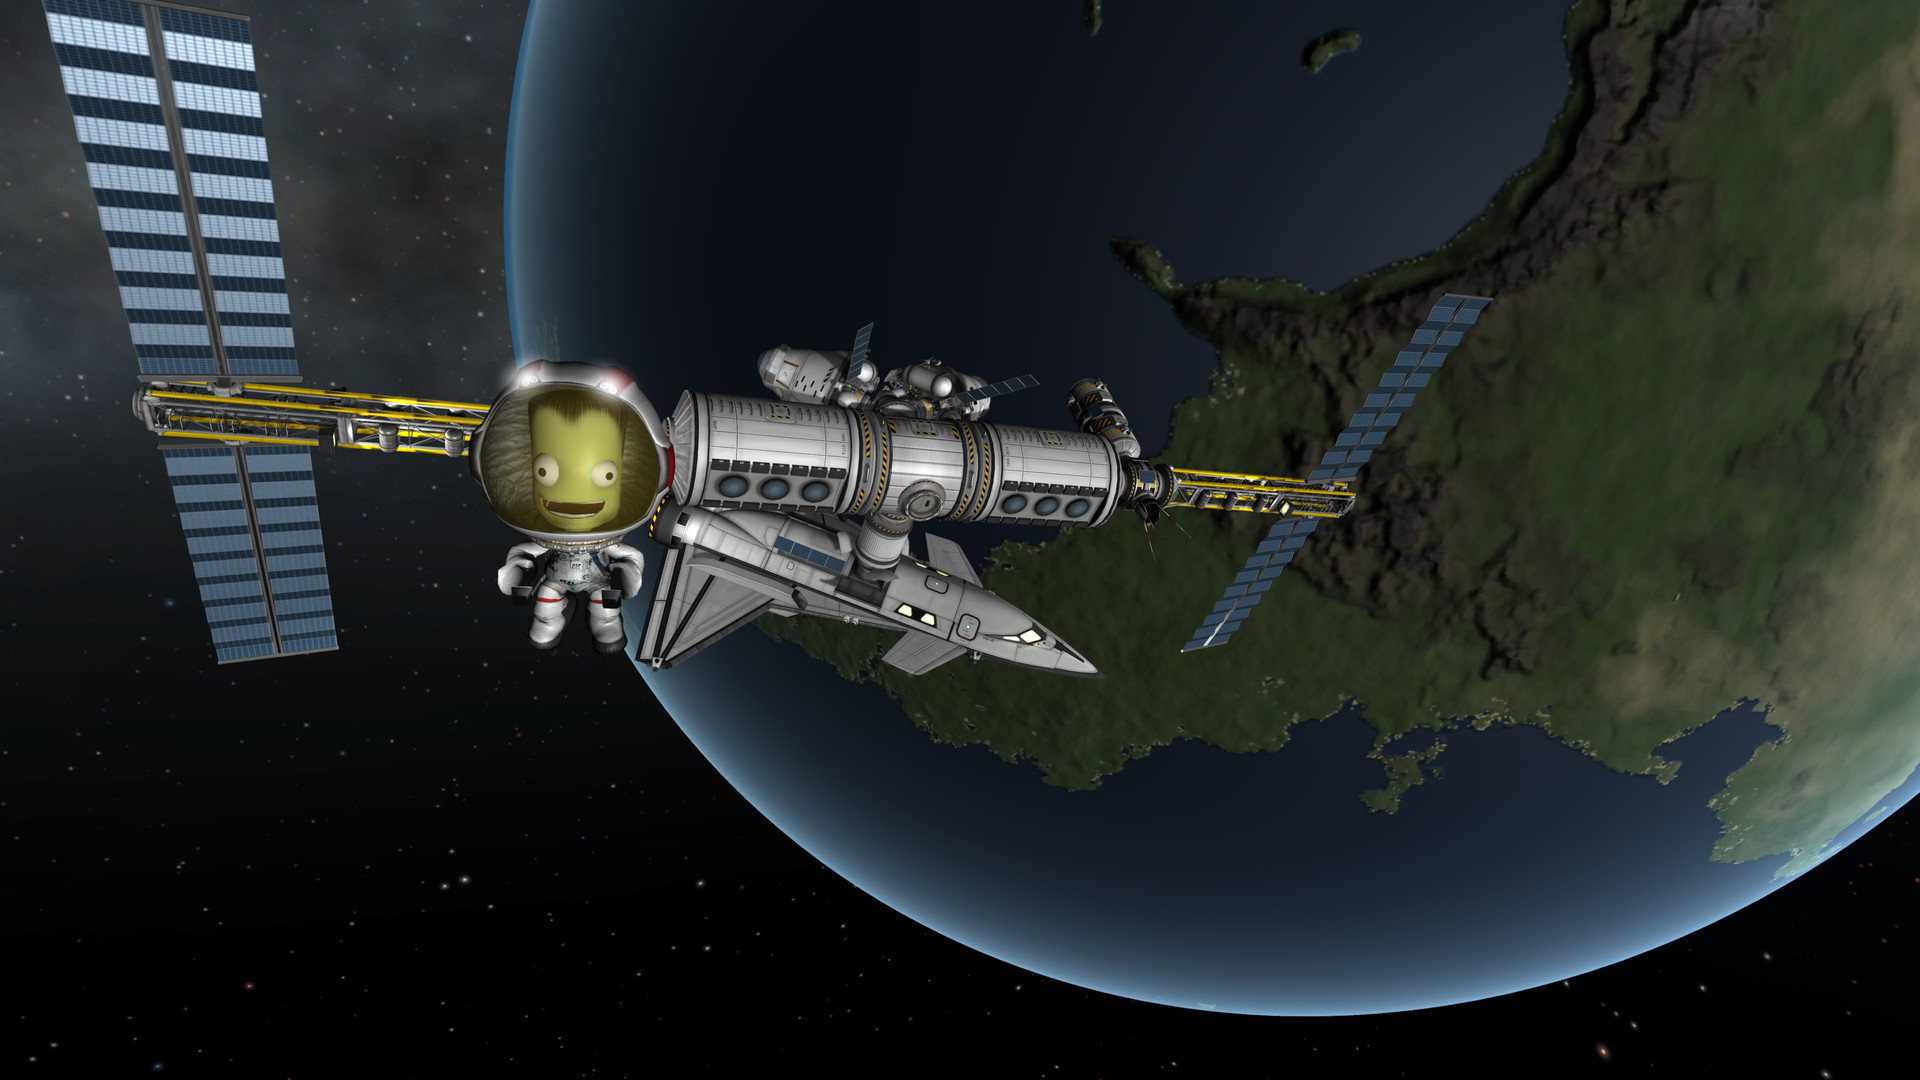 Best space games: Kerbal Space Program - image shows a Kerbal out in space.